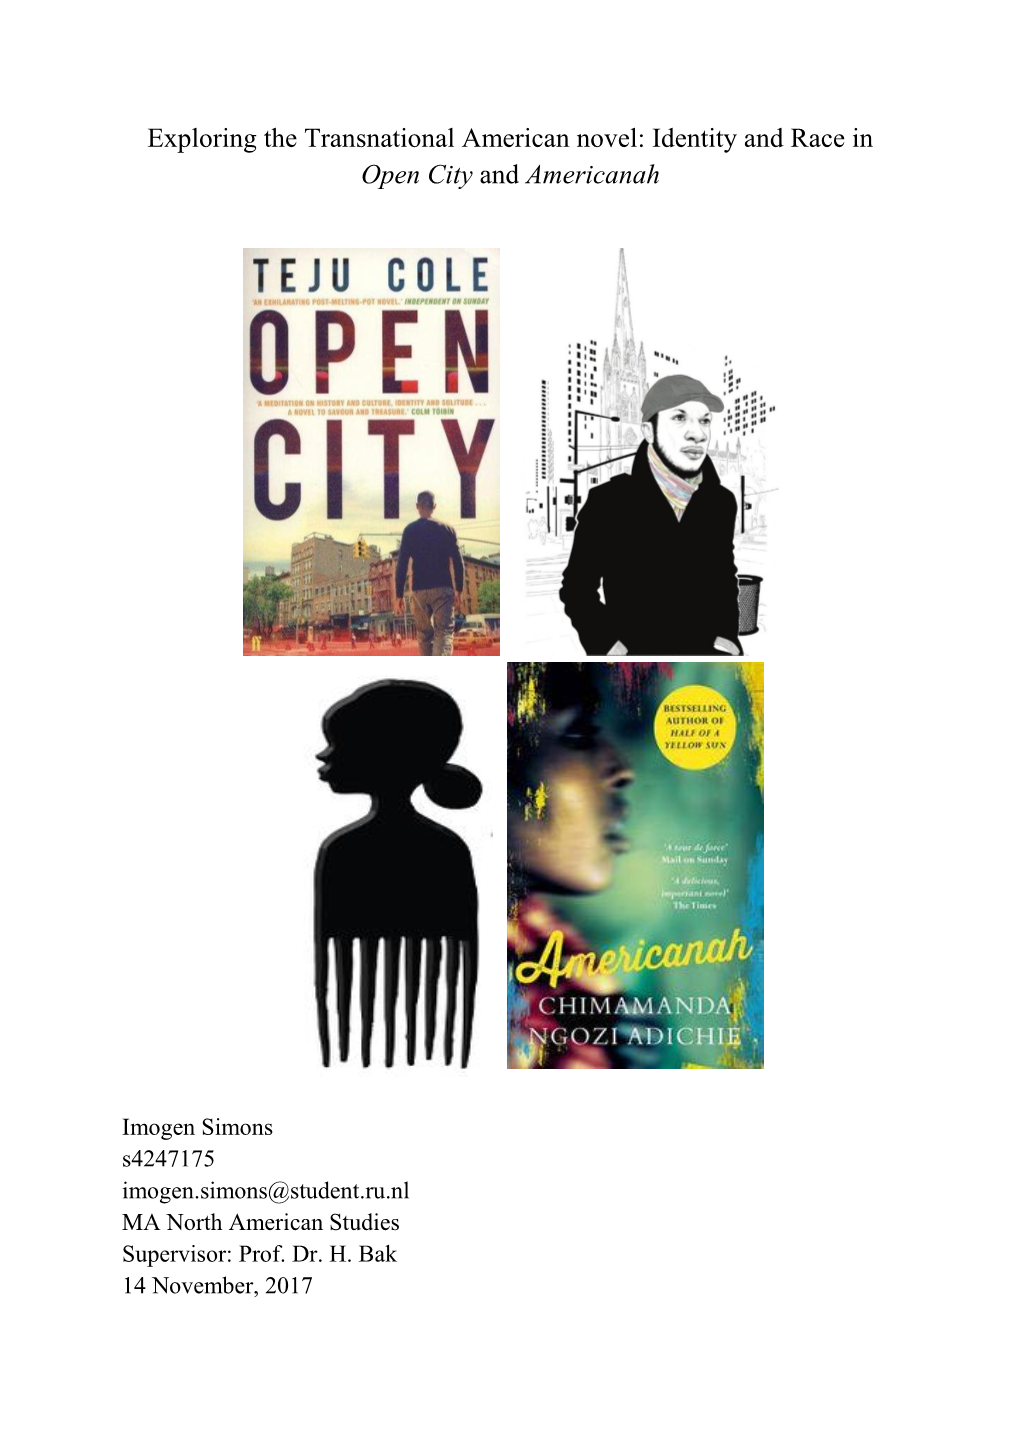 Identity and Race in Open City and Americanah